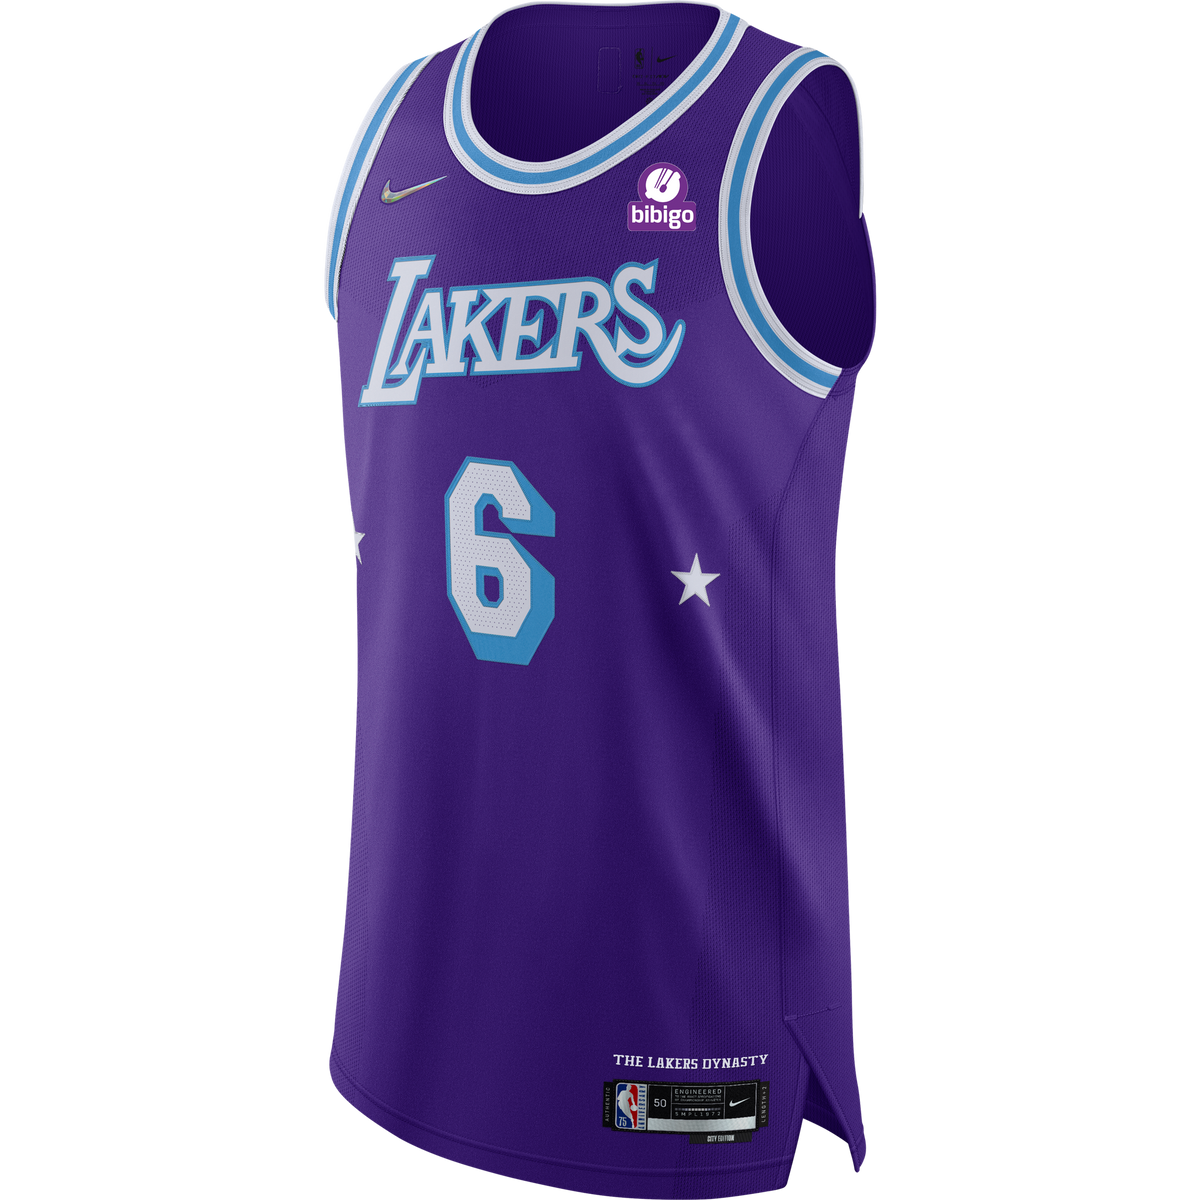 LeBron James Lakers jersey (special edition) Size M (BRAND NEW)